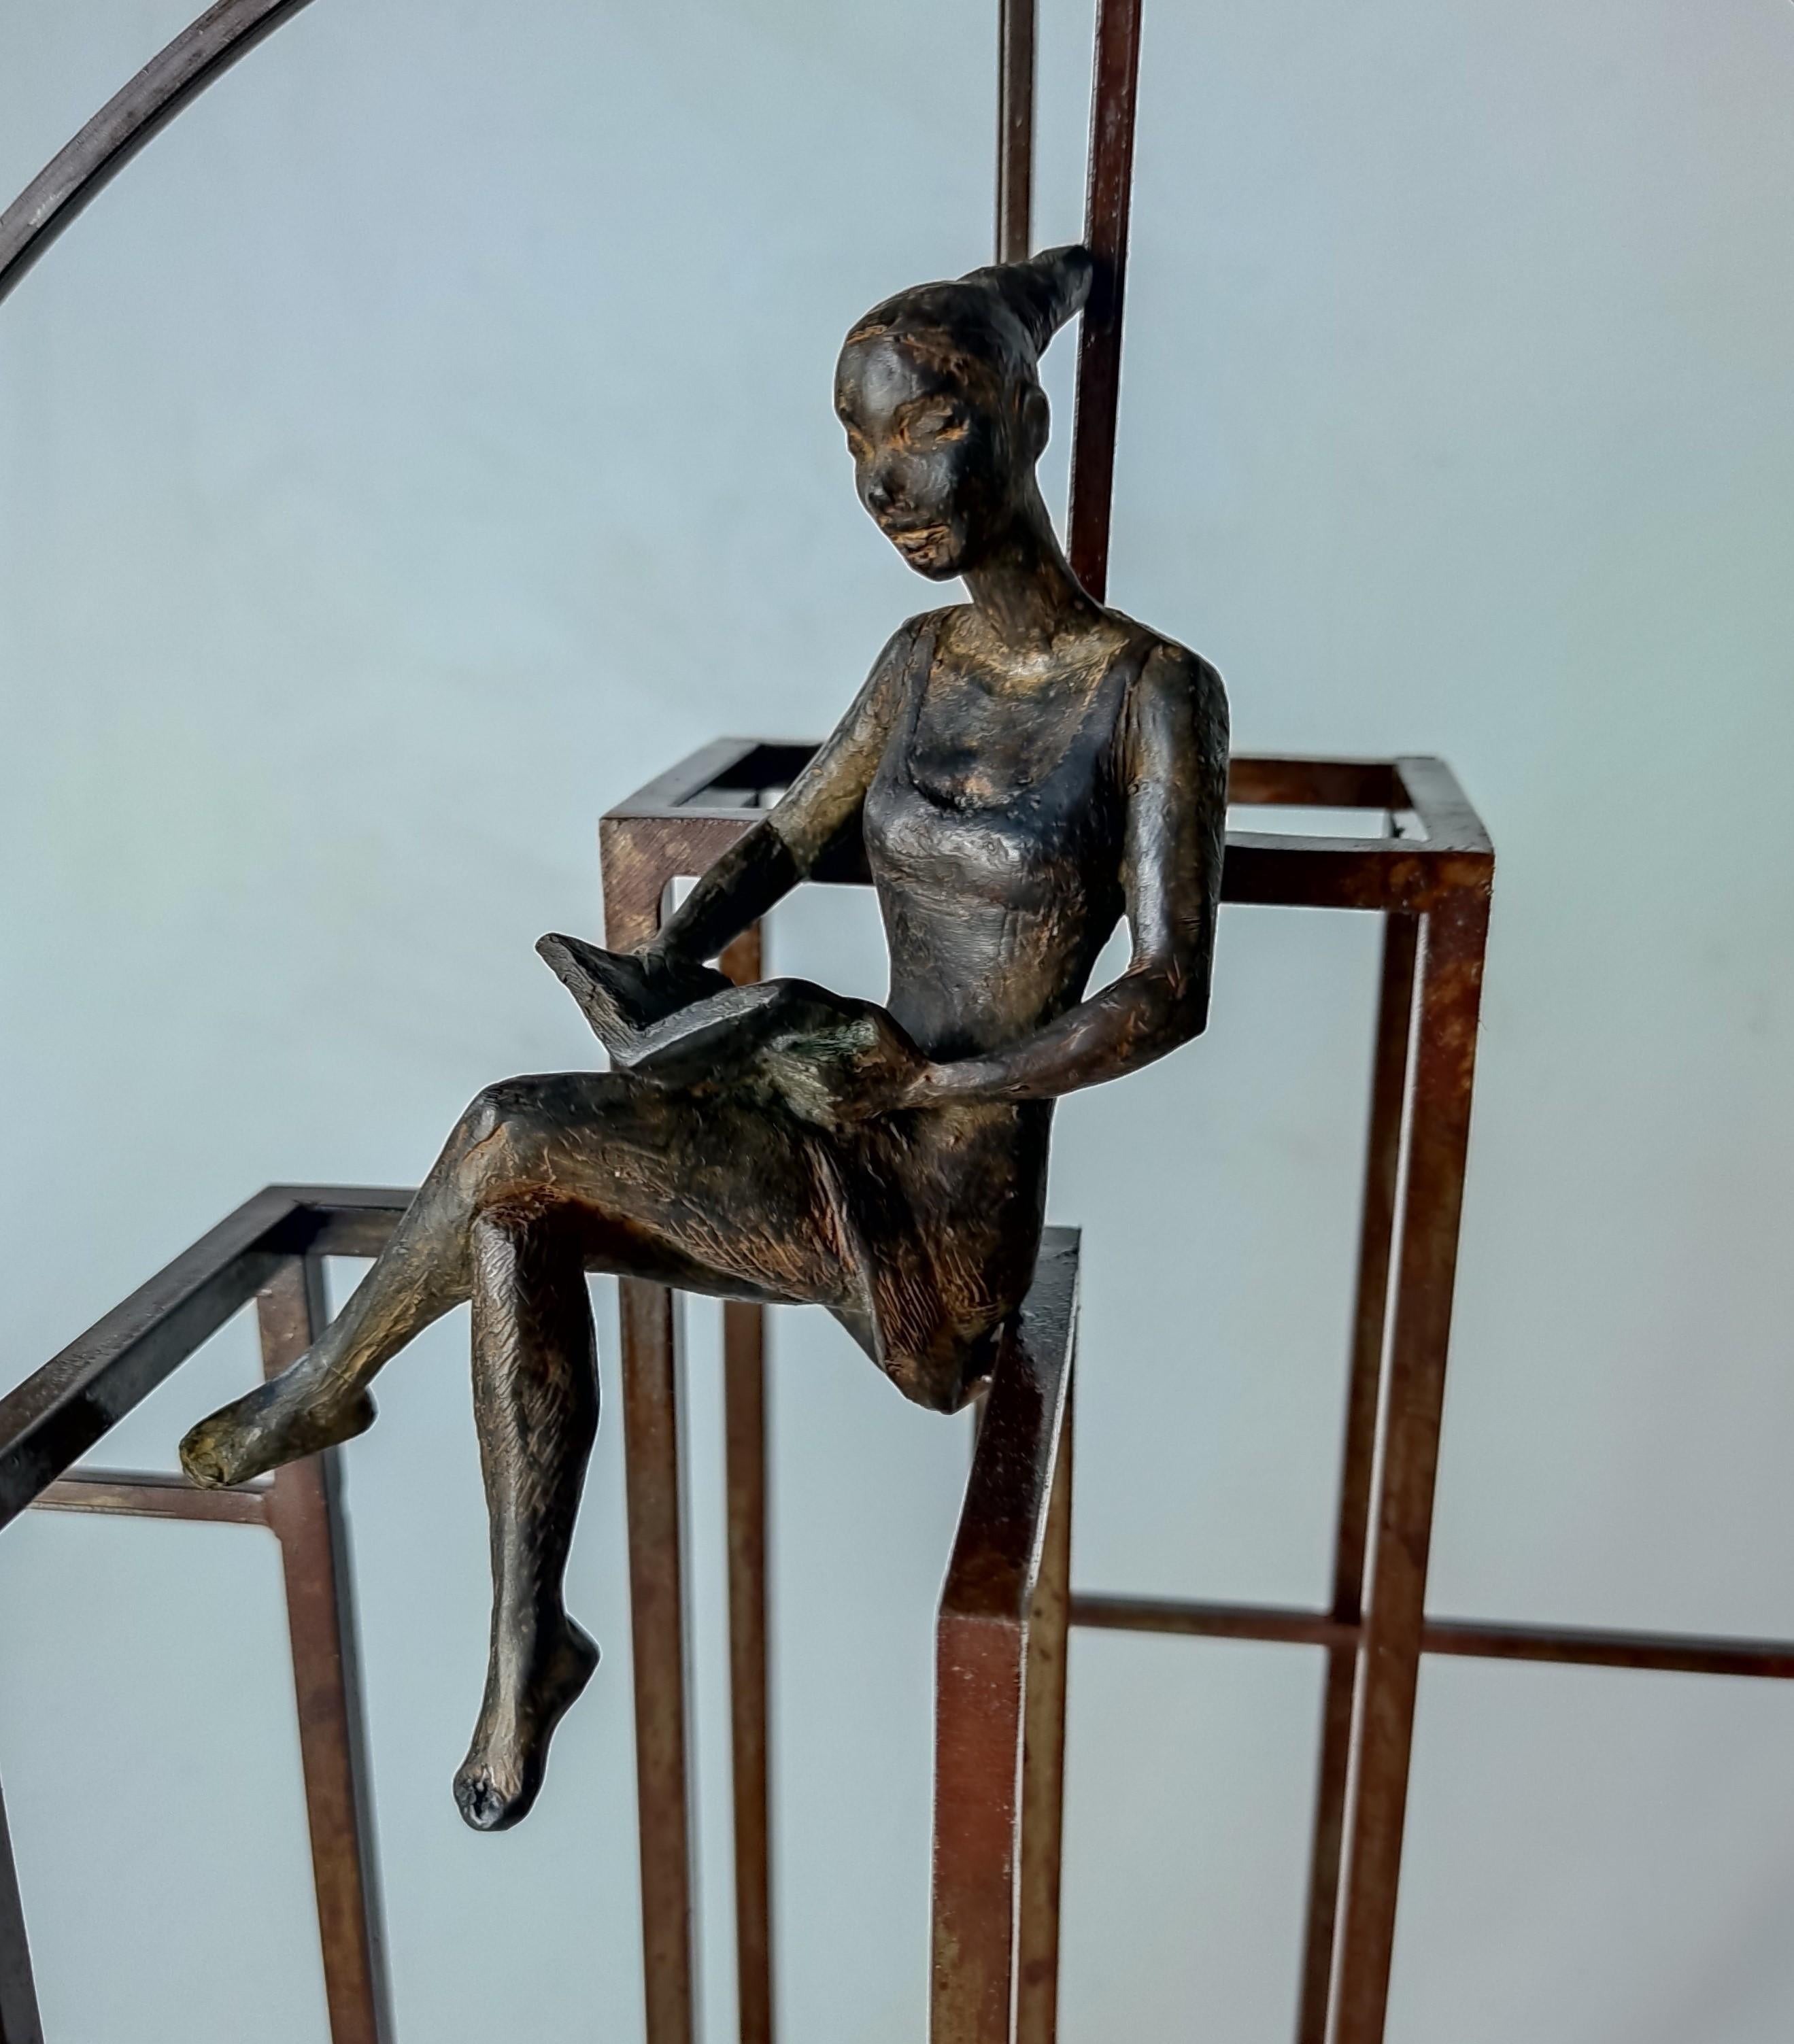 Thriller is a bronze sculpture with dark brown patina, it is connected to a steel base. The edition size is 25. This sculpture stands on shelf as well as be hung on wall. 

Joan’s latest sculpture series of female figures brings an out-of-the-box